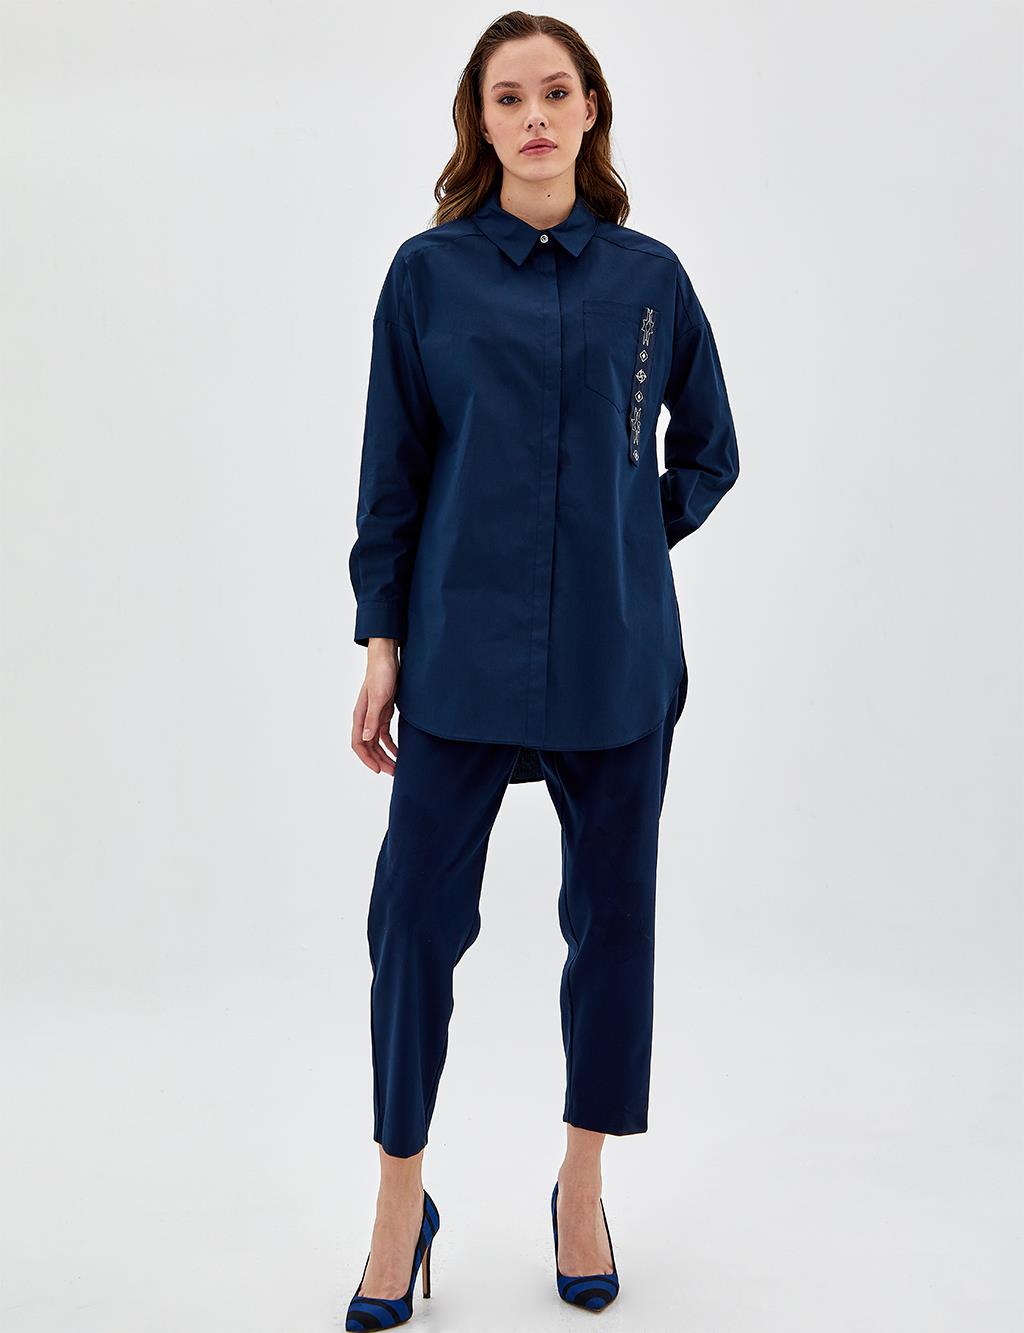 Single Pocket Embroidered Tunic Navy